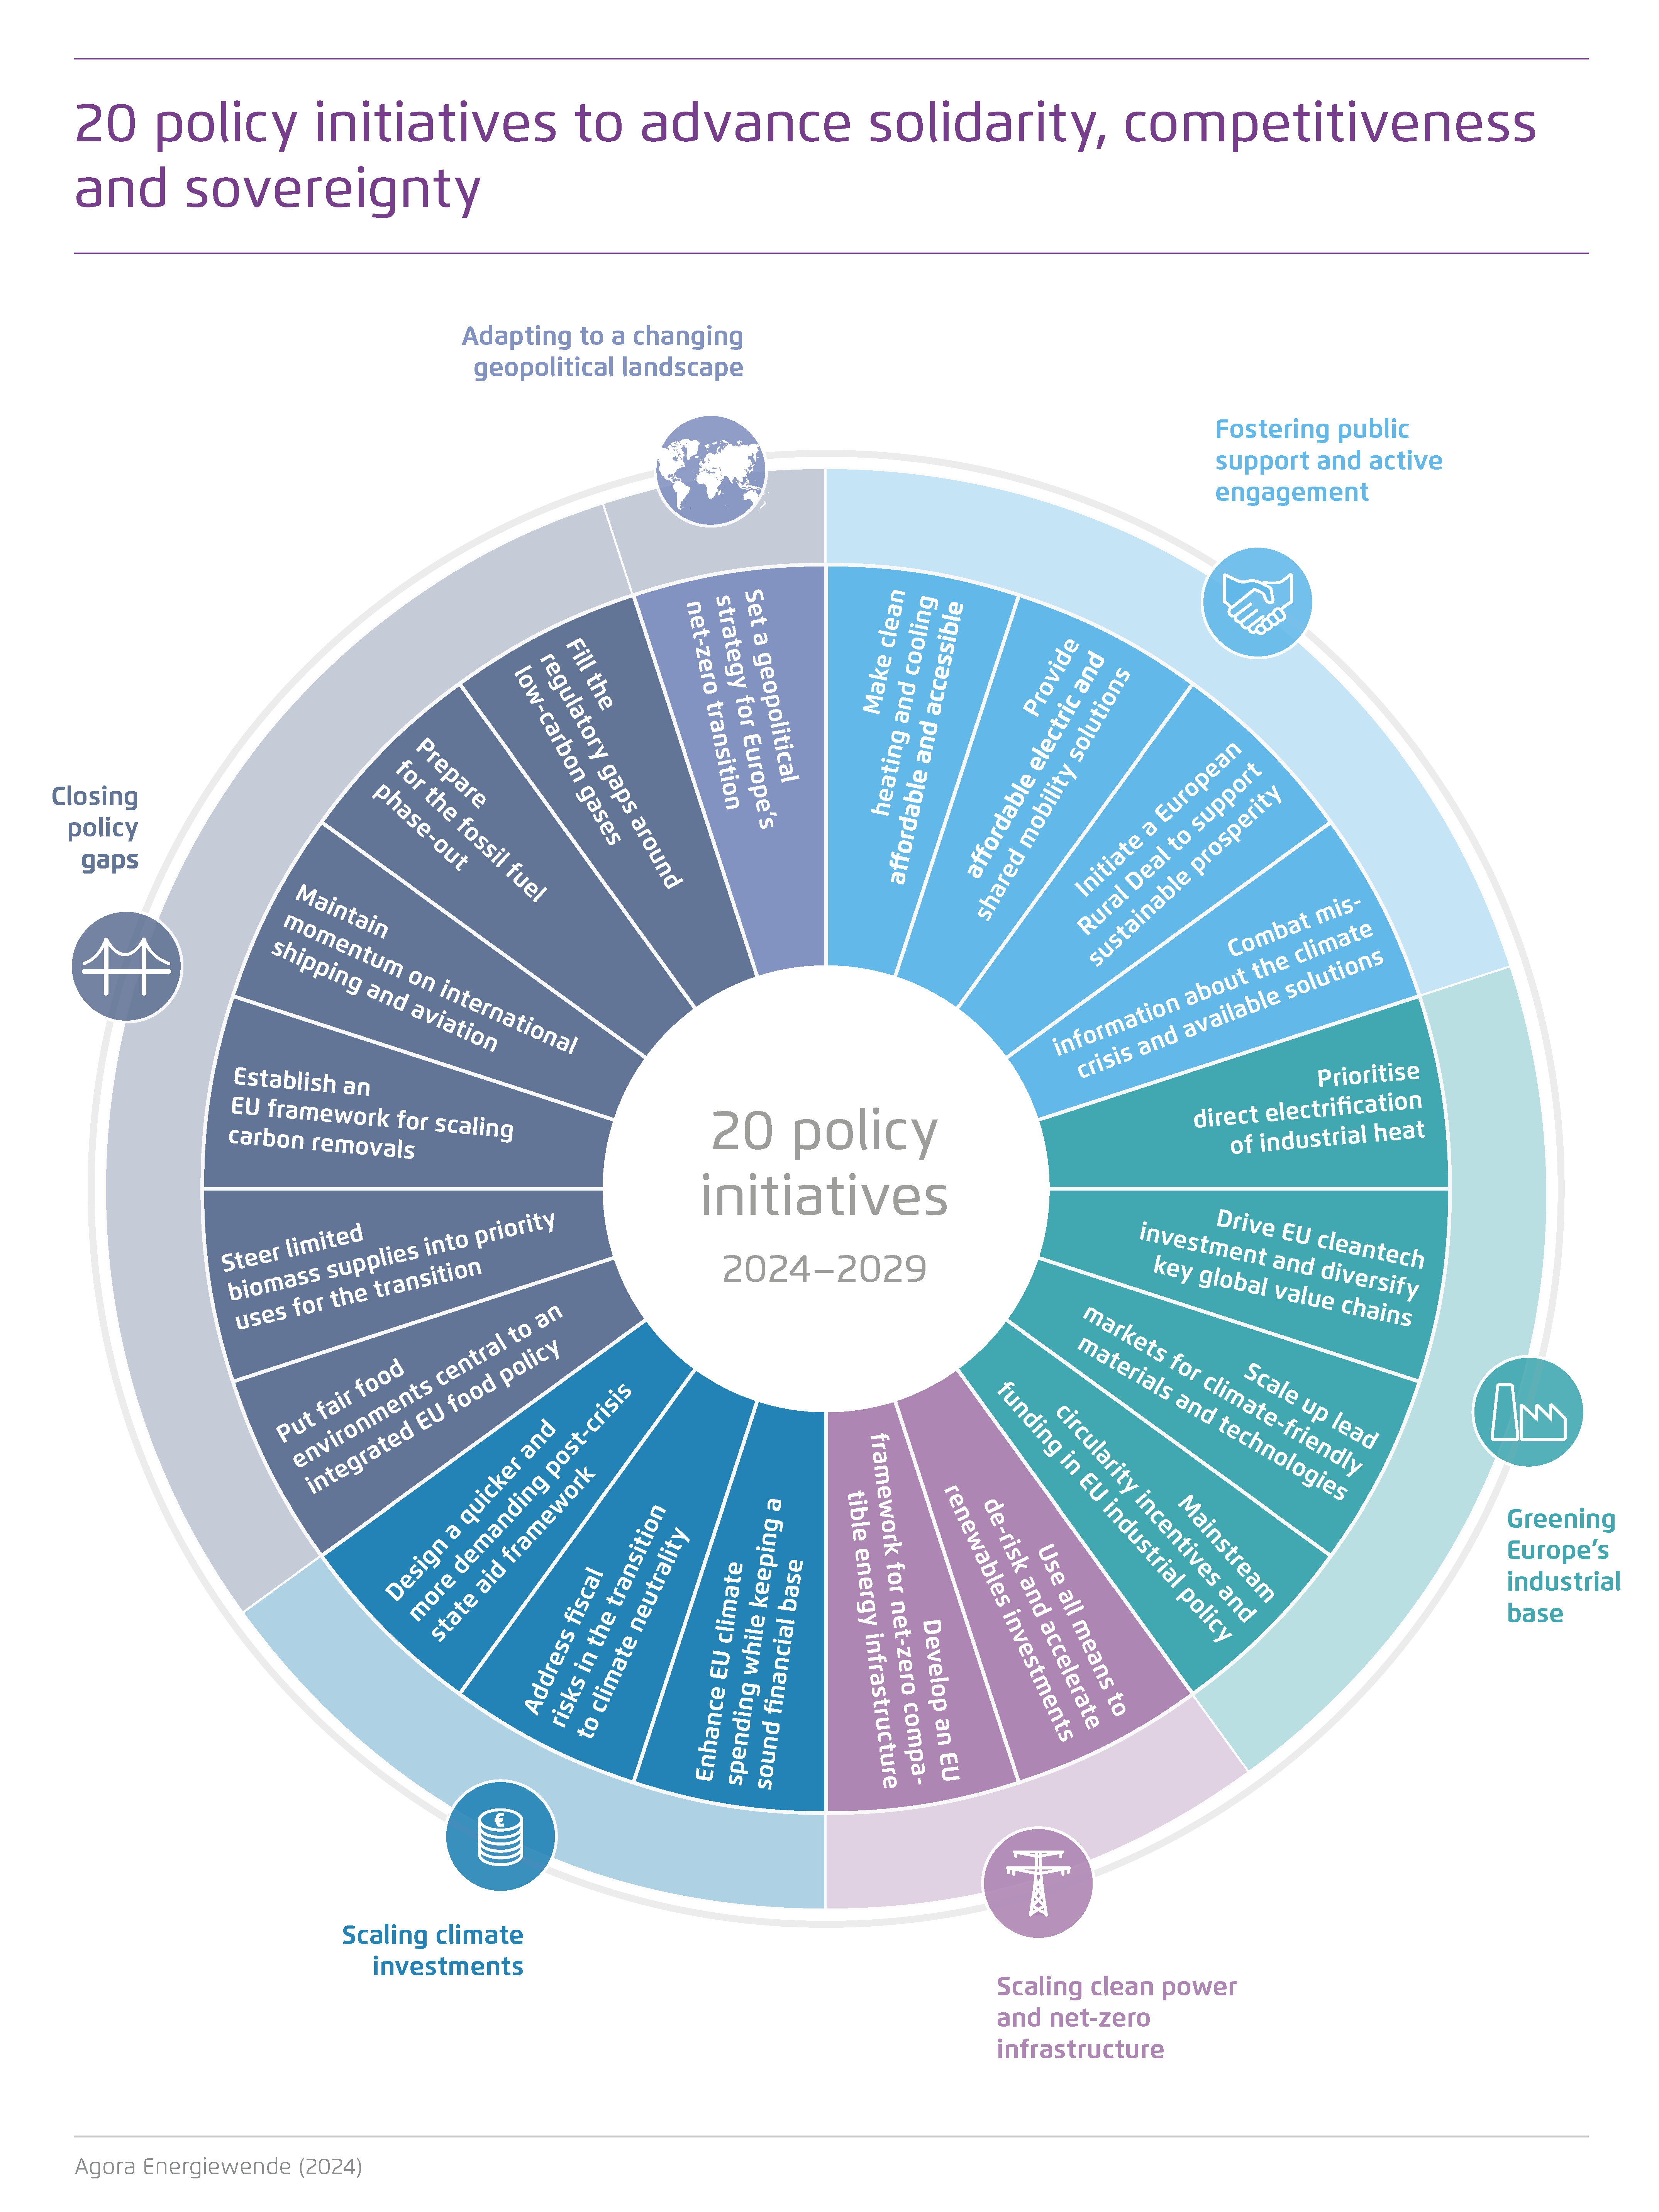 Preview for 20 policy initiatives to advance solidarity, competitiveness and sovereignty